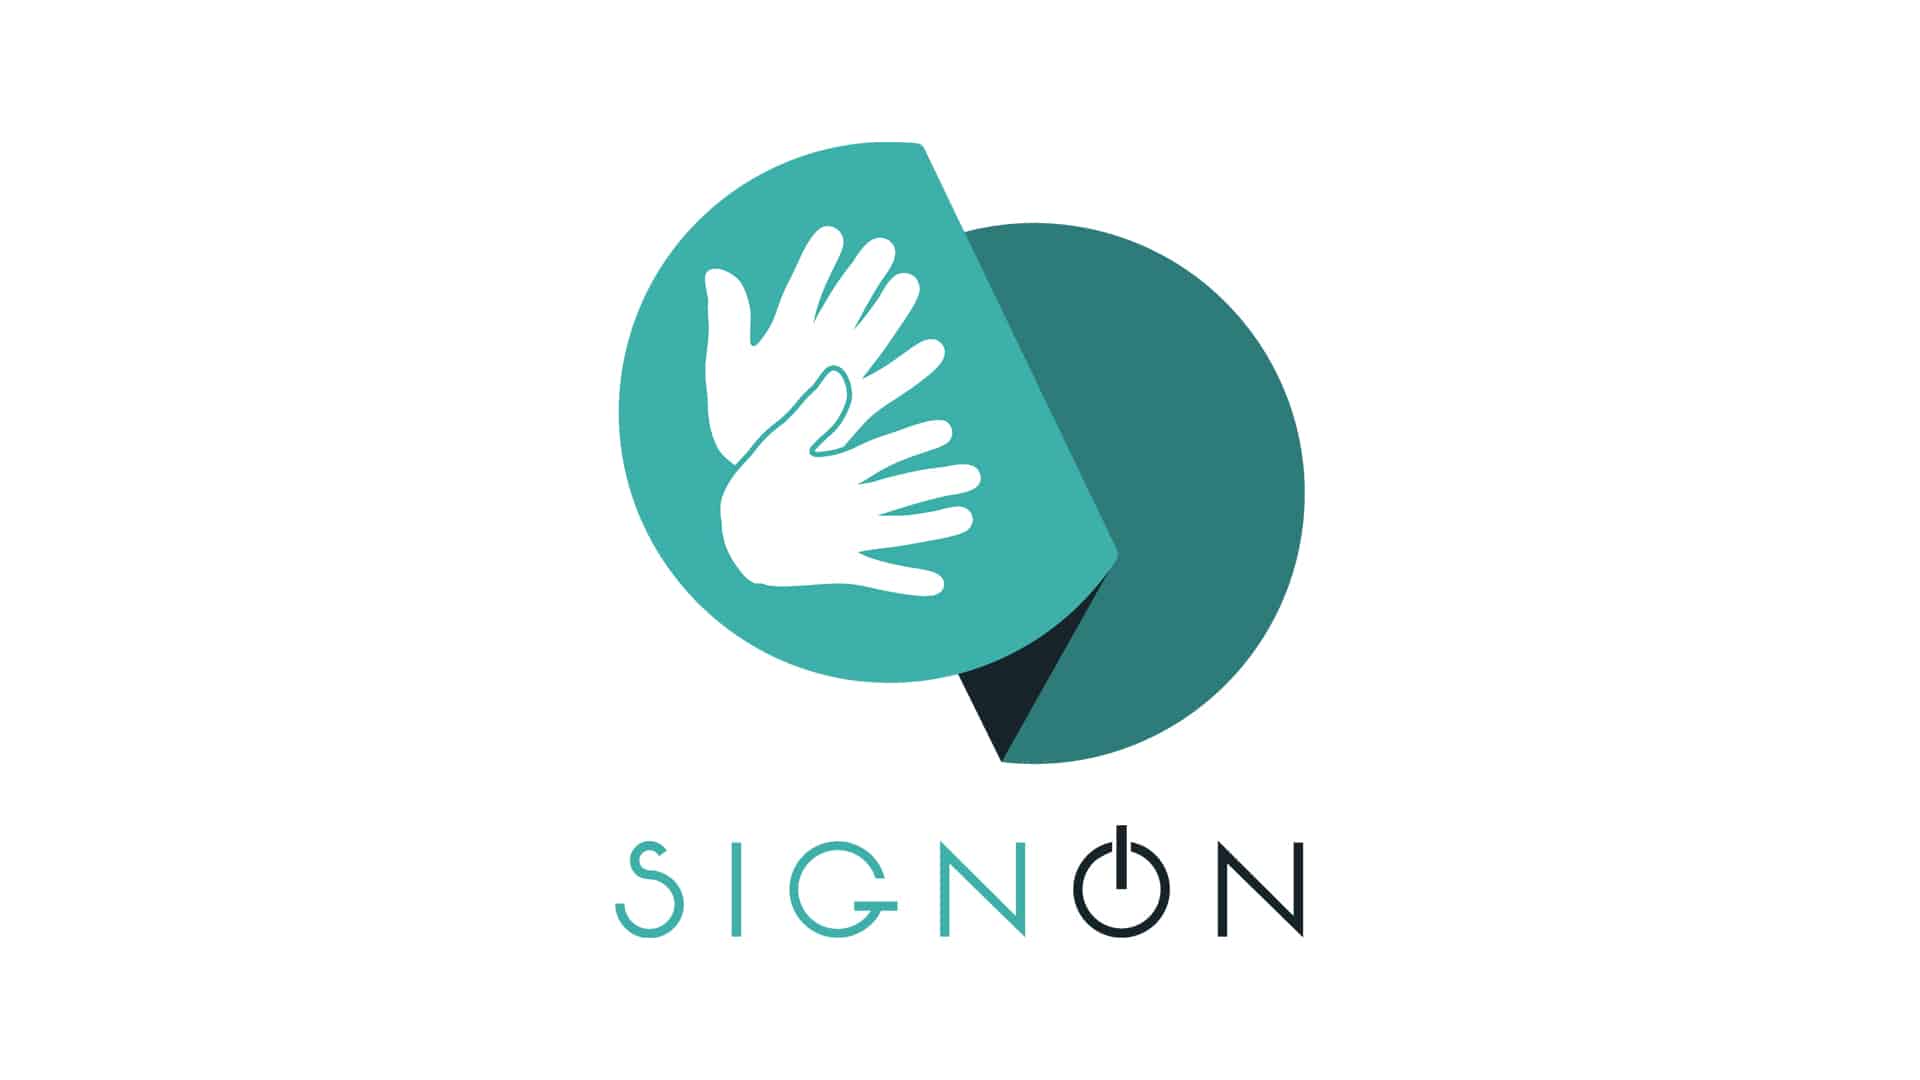 SignON project logo - 2 green cut off circle shapes with two white hands in the lighter coloured circle.